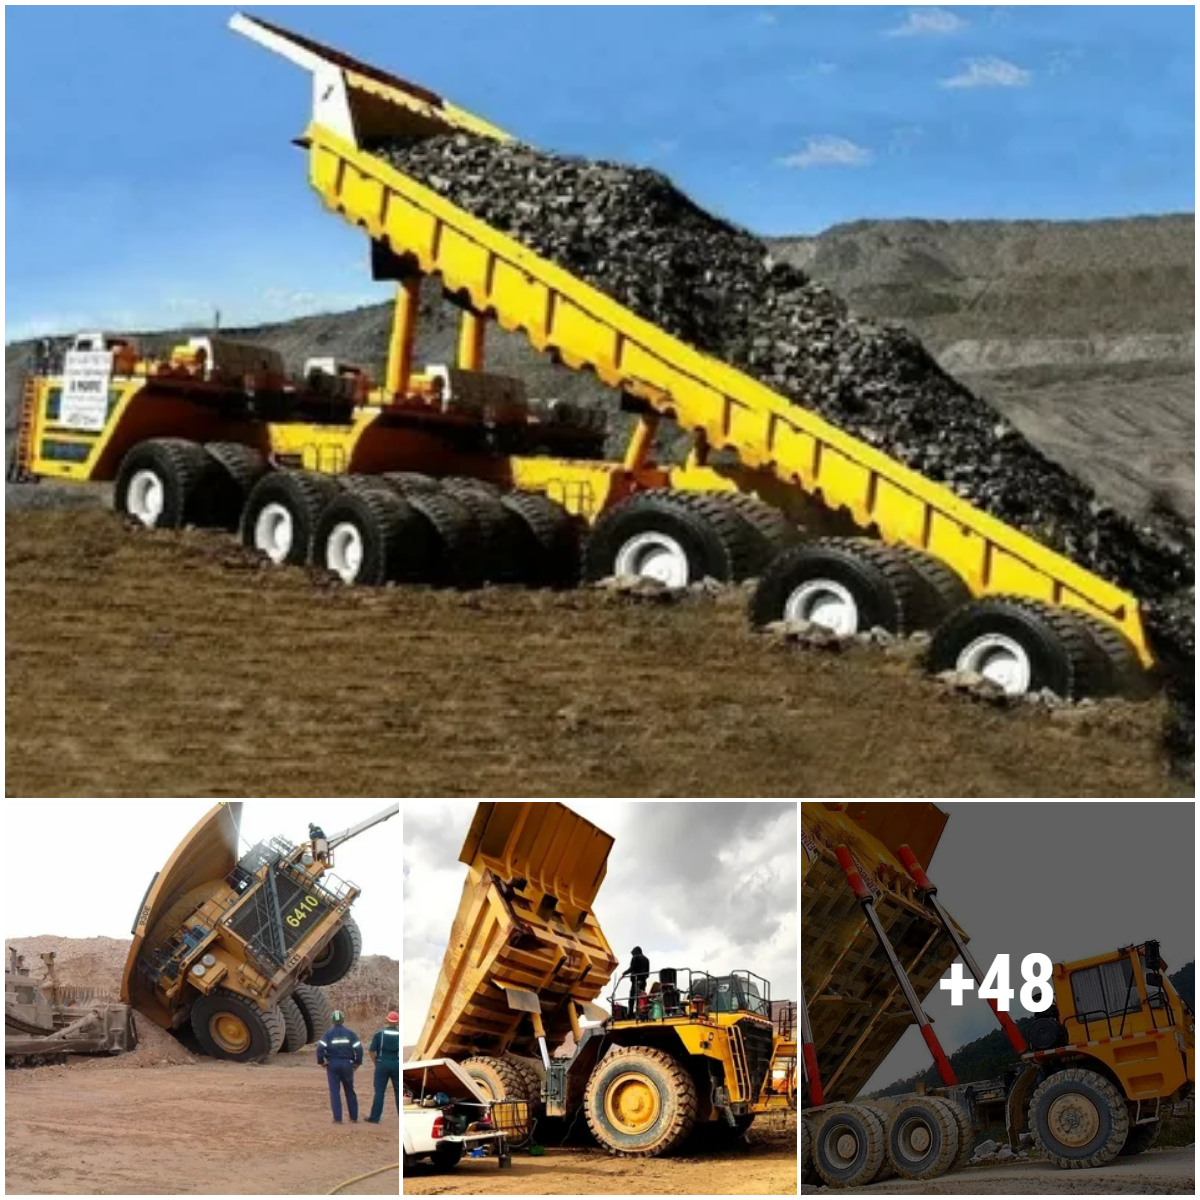 Overcoming obstacles: Improve ability and agility in handling the largest heavy machinery – Comprehensive dump truck operating knowledge